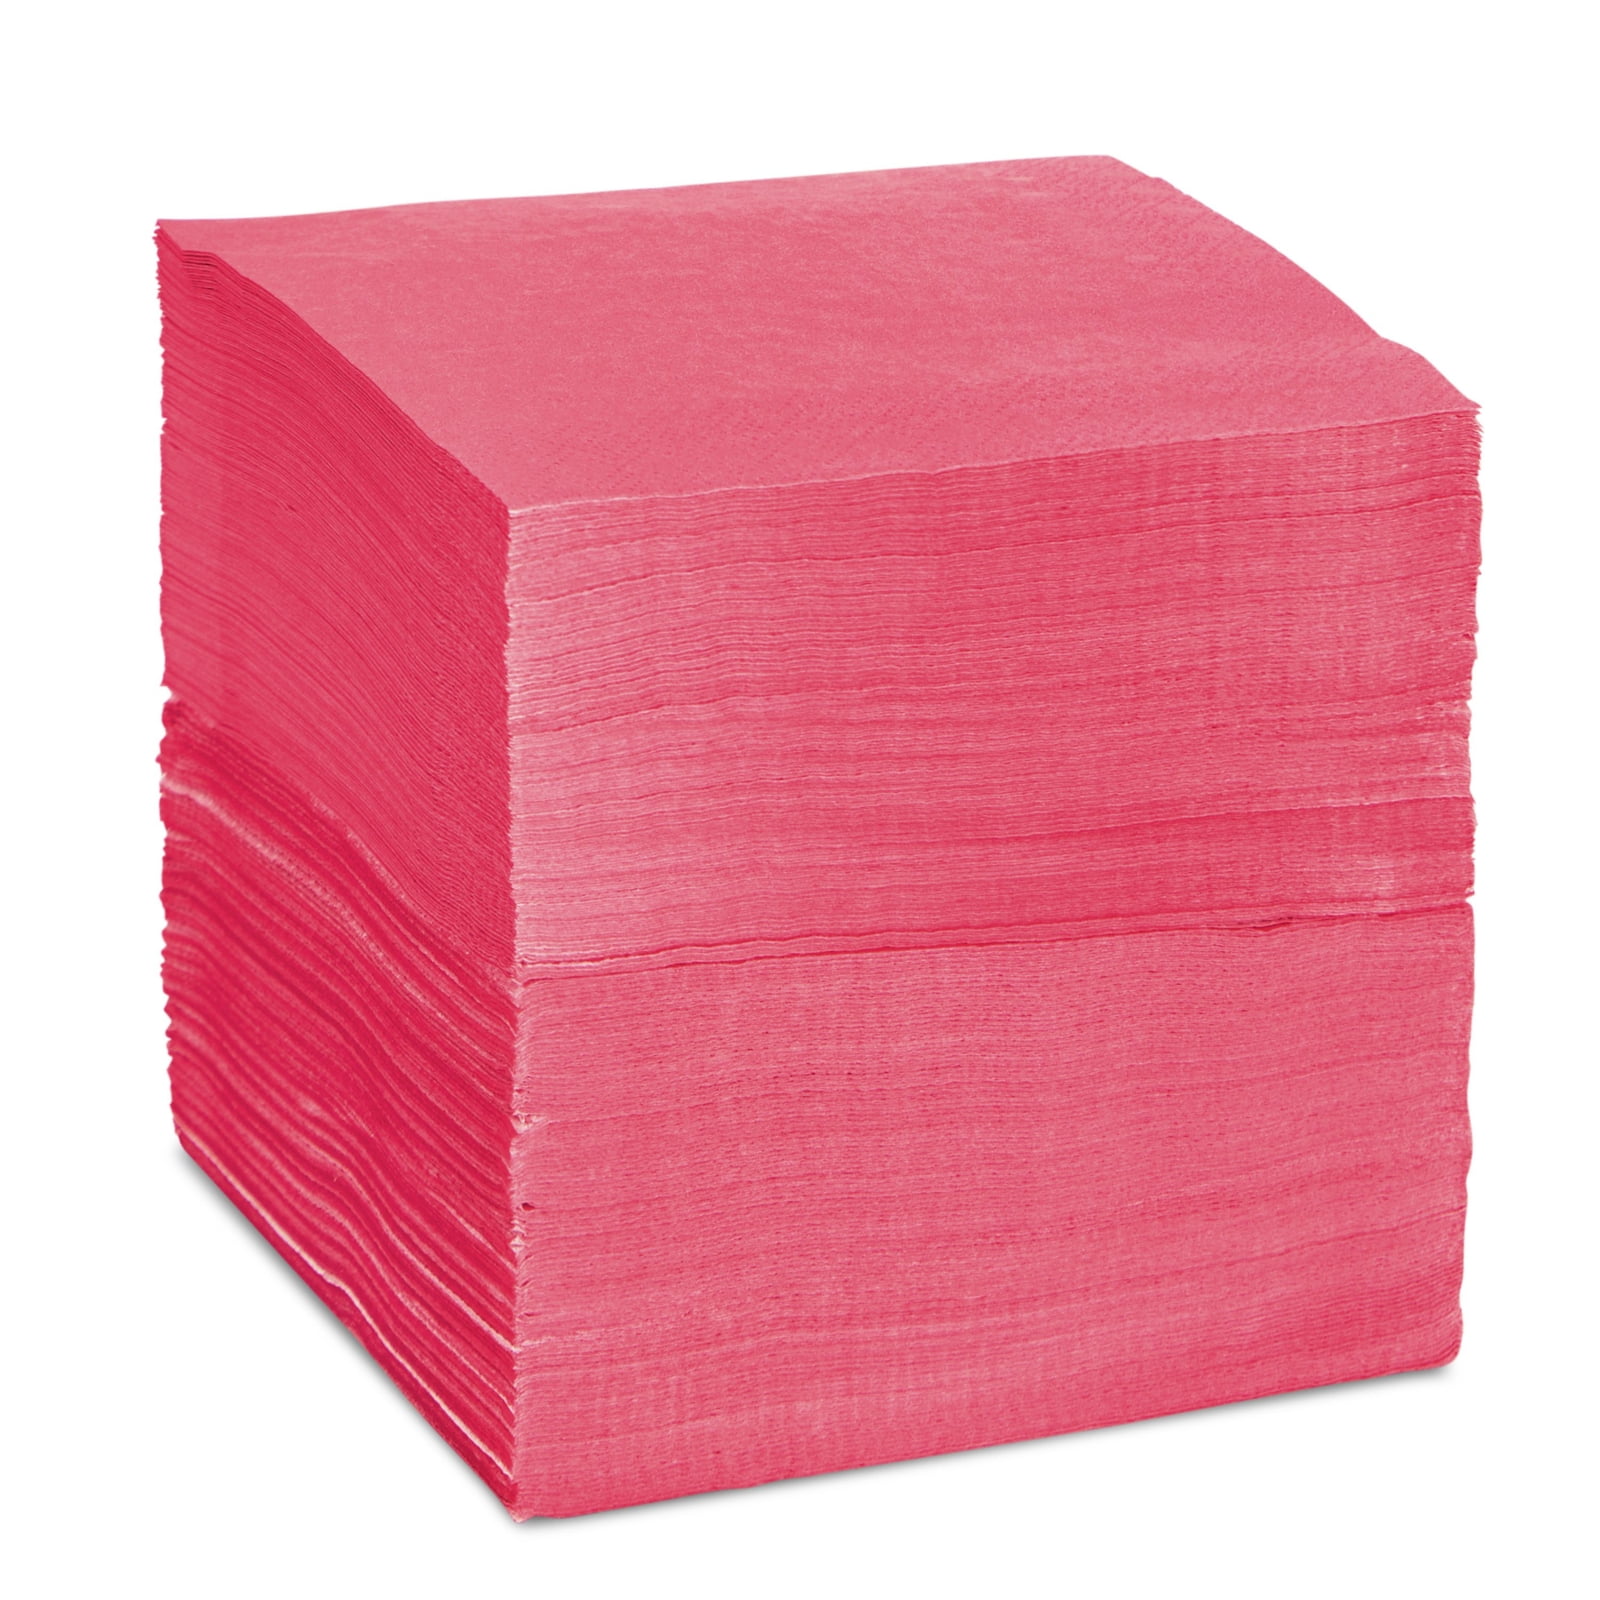 Brunch Party Supplies, Pink Paper Napkins (5 x 5, 50 Pack), PACK